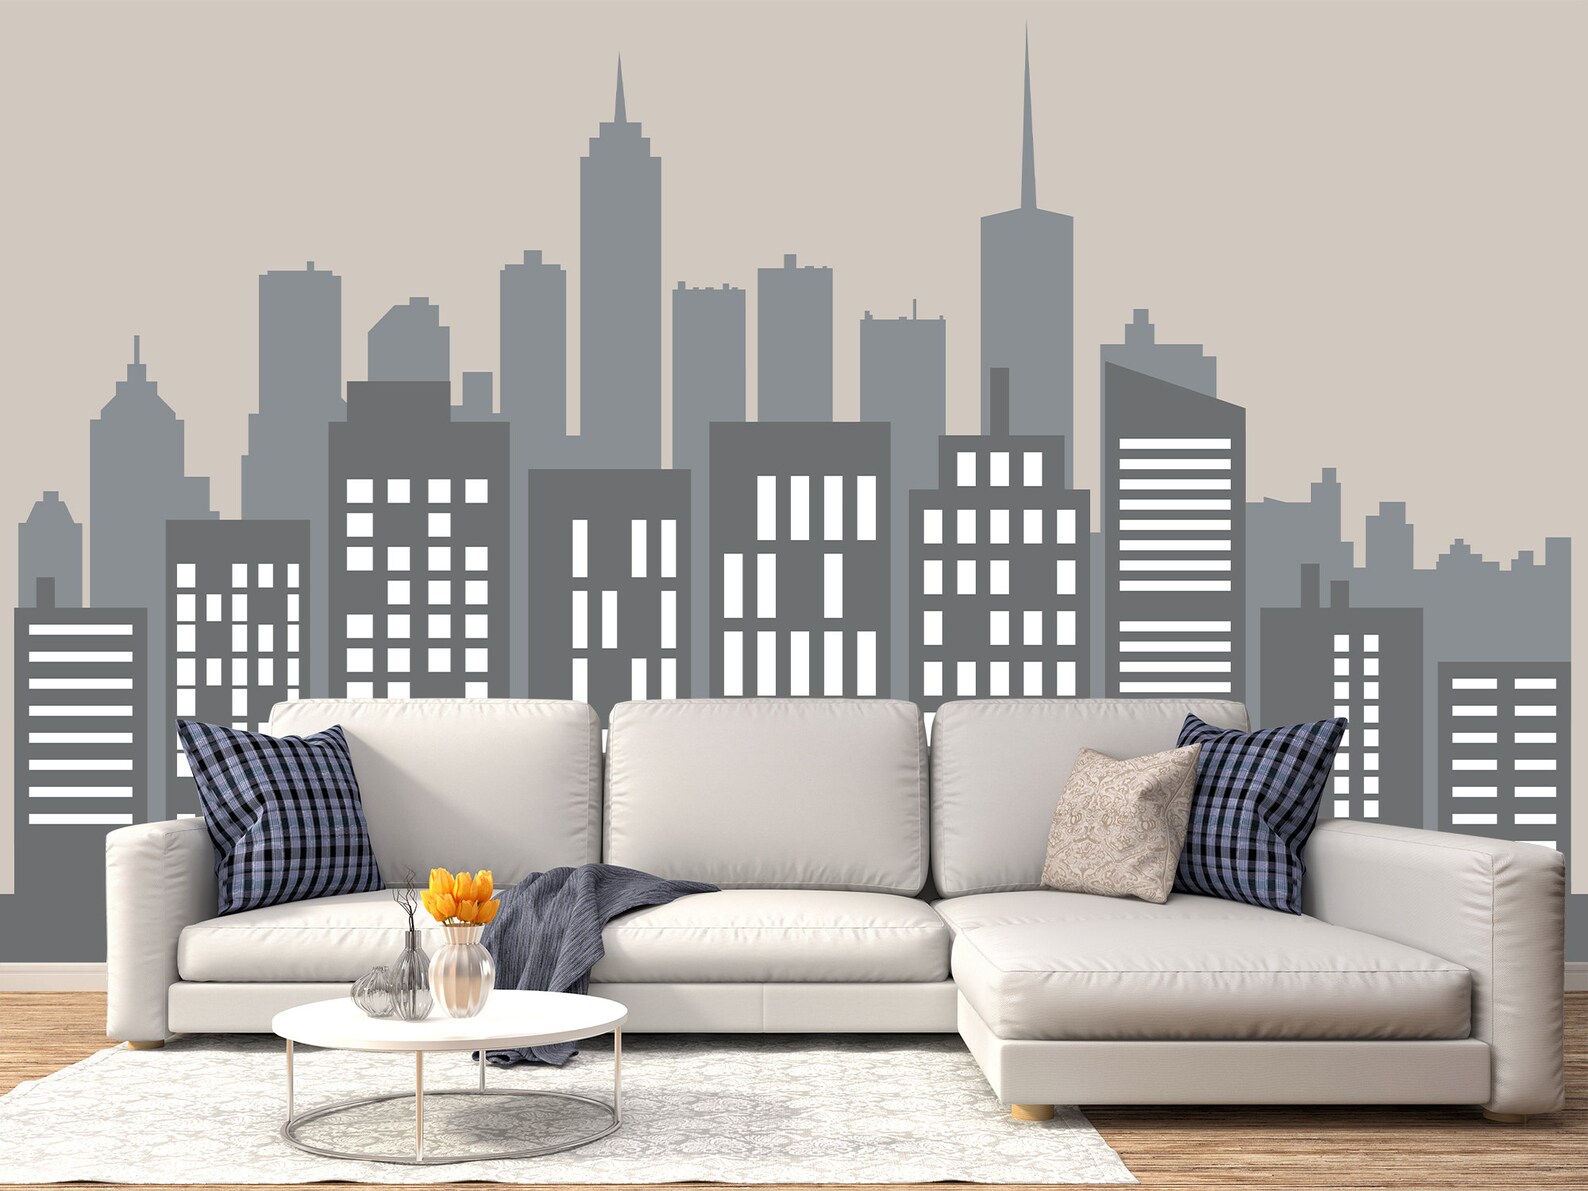 Night City Wallpaper Removable Town Lights Wall Mural - Etsy